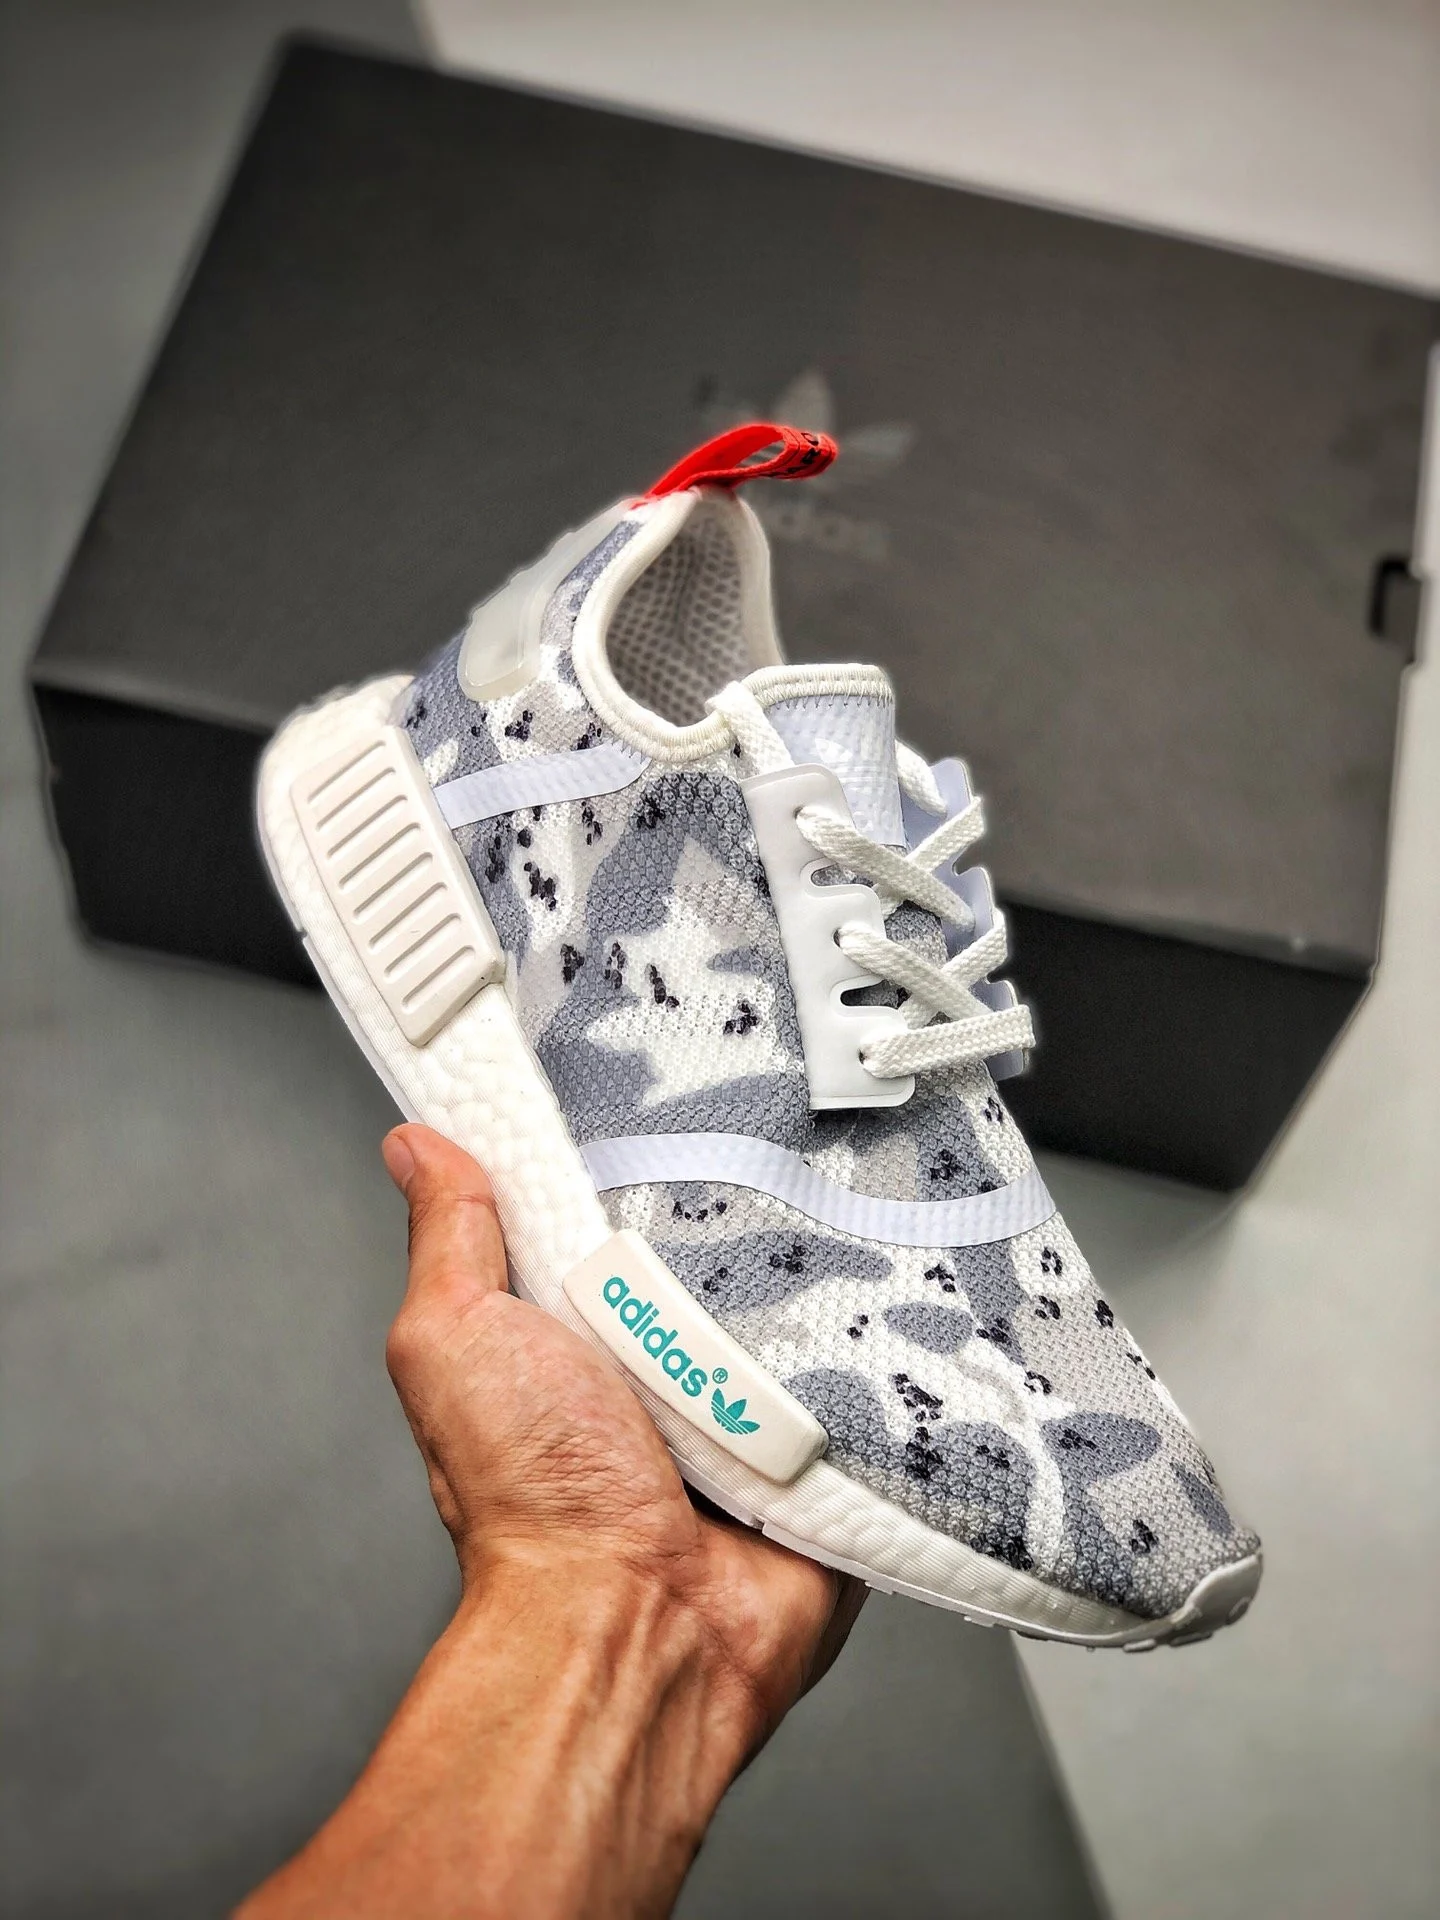 Adidas NMD R1 Cloud White G27933 For Sale